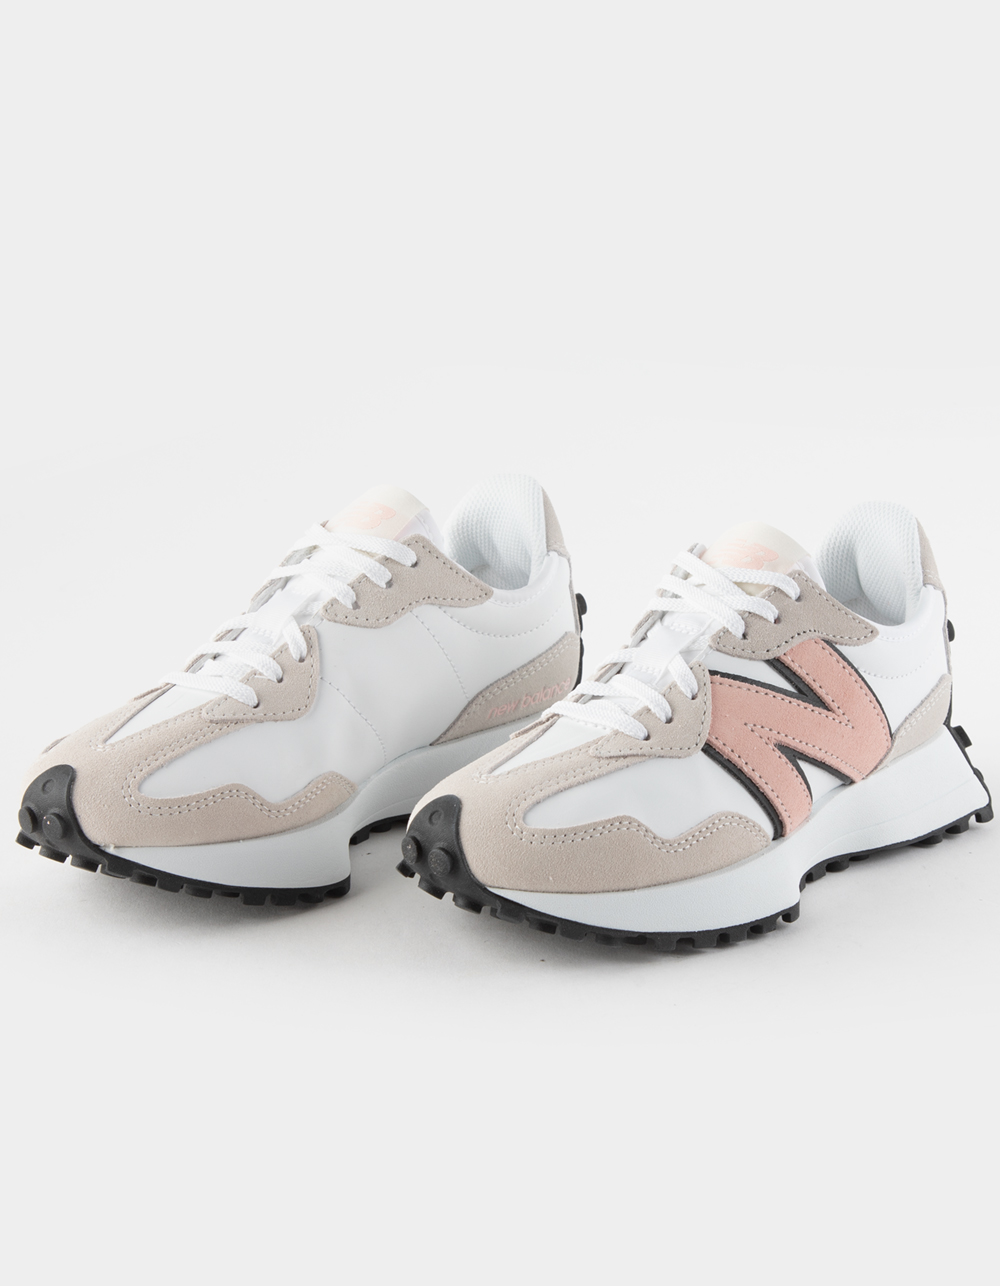 NEW BALANCE 327 Womens Shoes - DUSTY PINK | Tillys